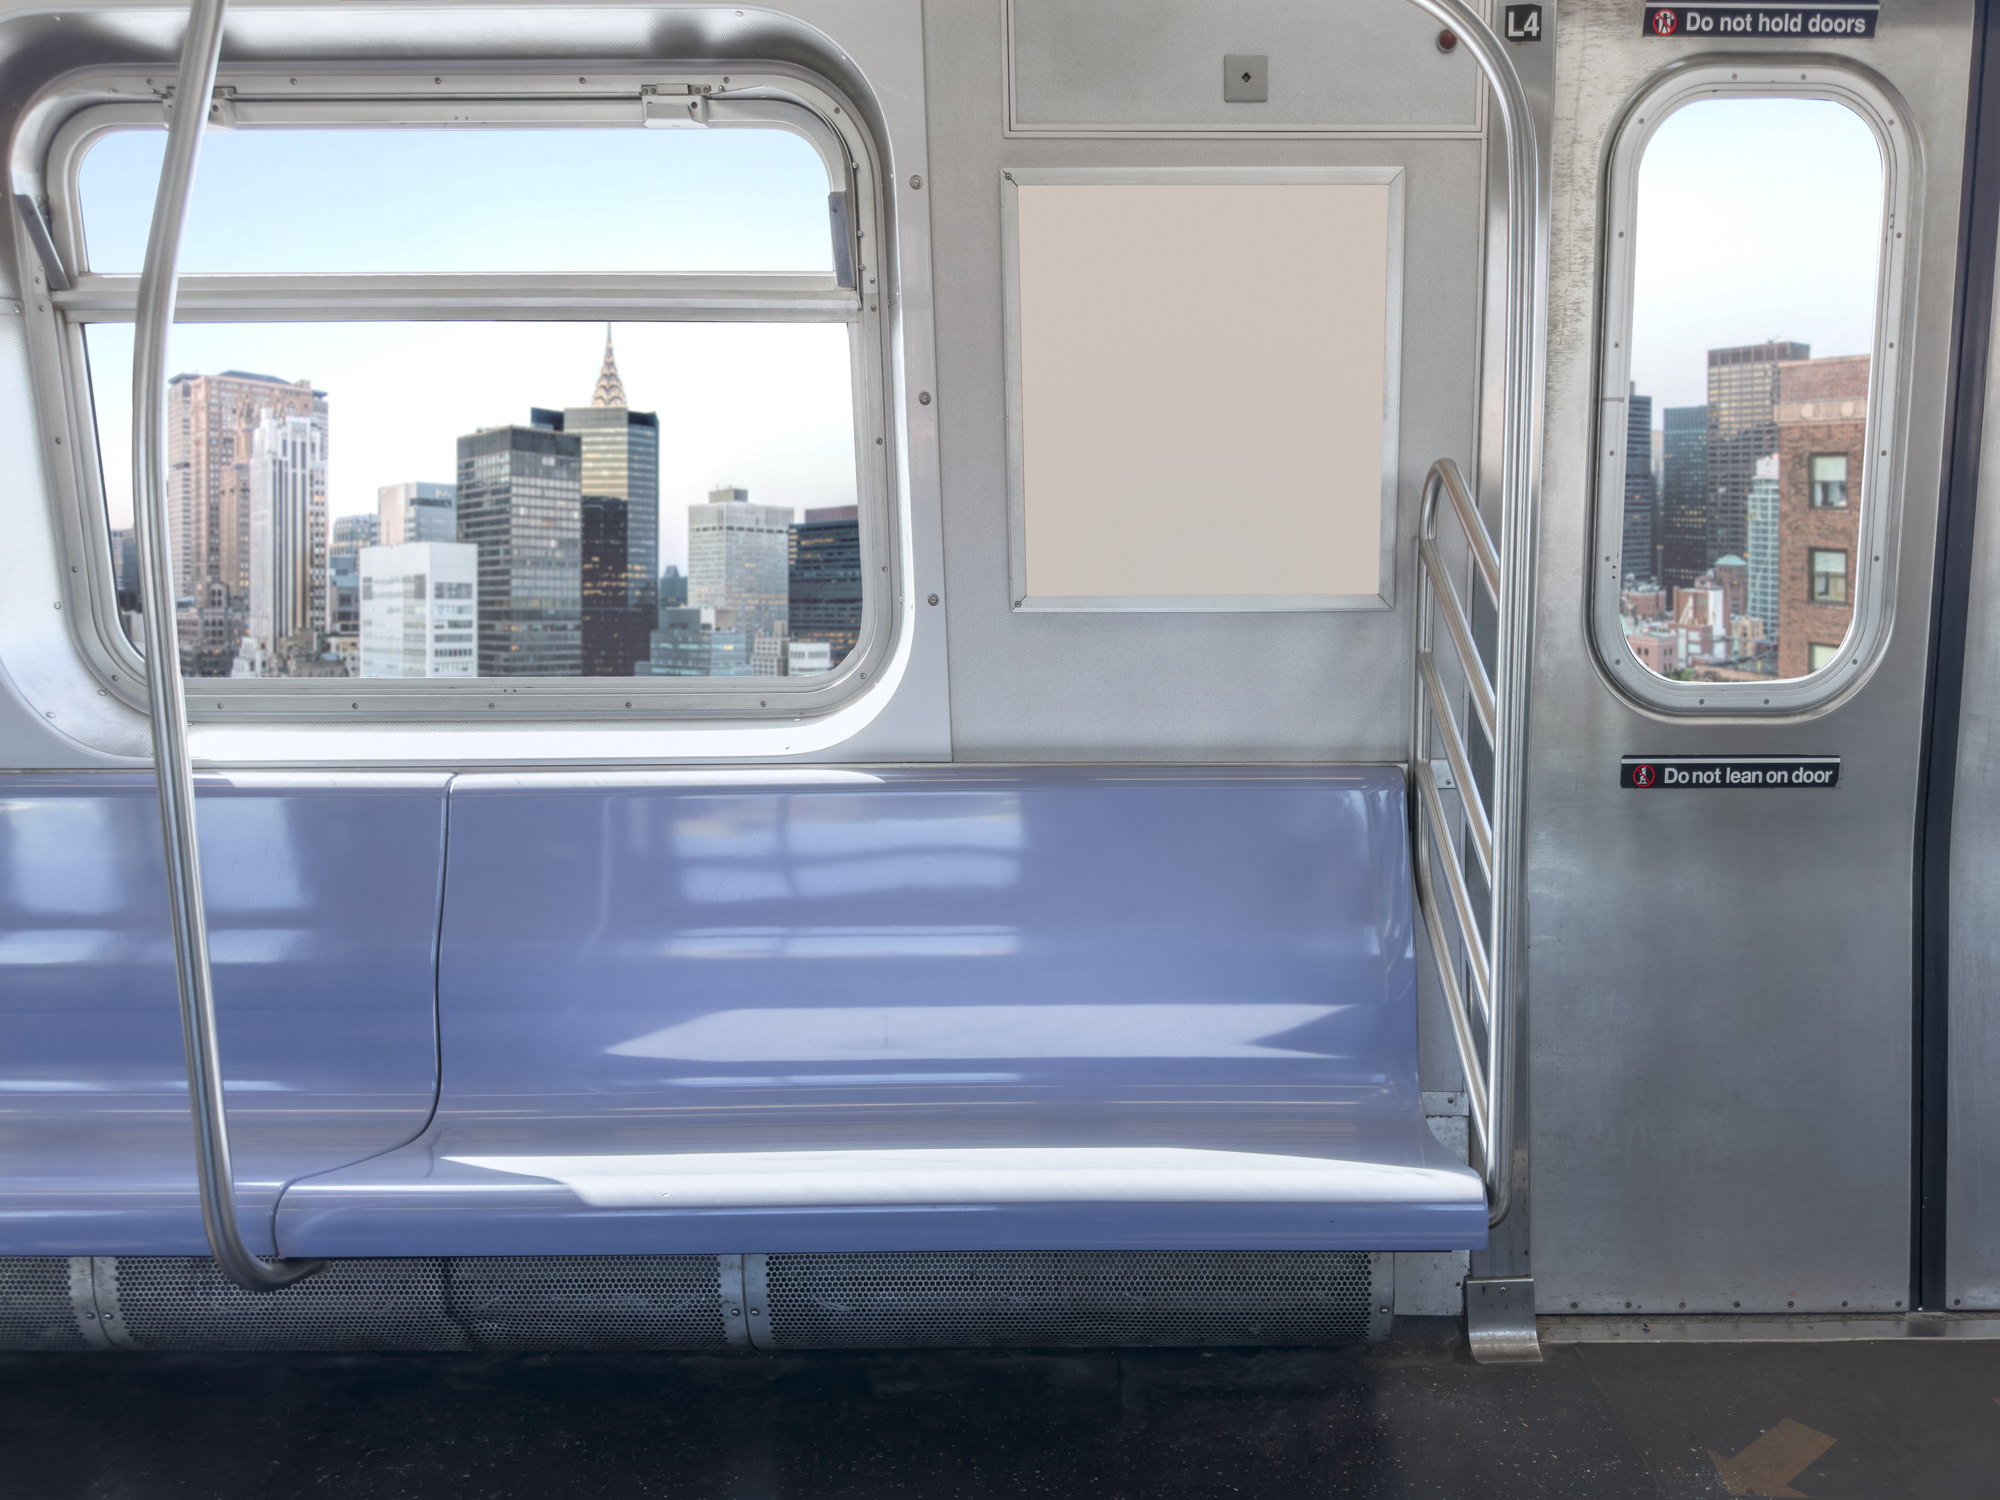 Empty subway car interior with a view of city buildings through the window